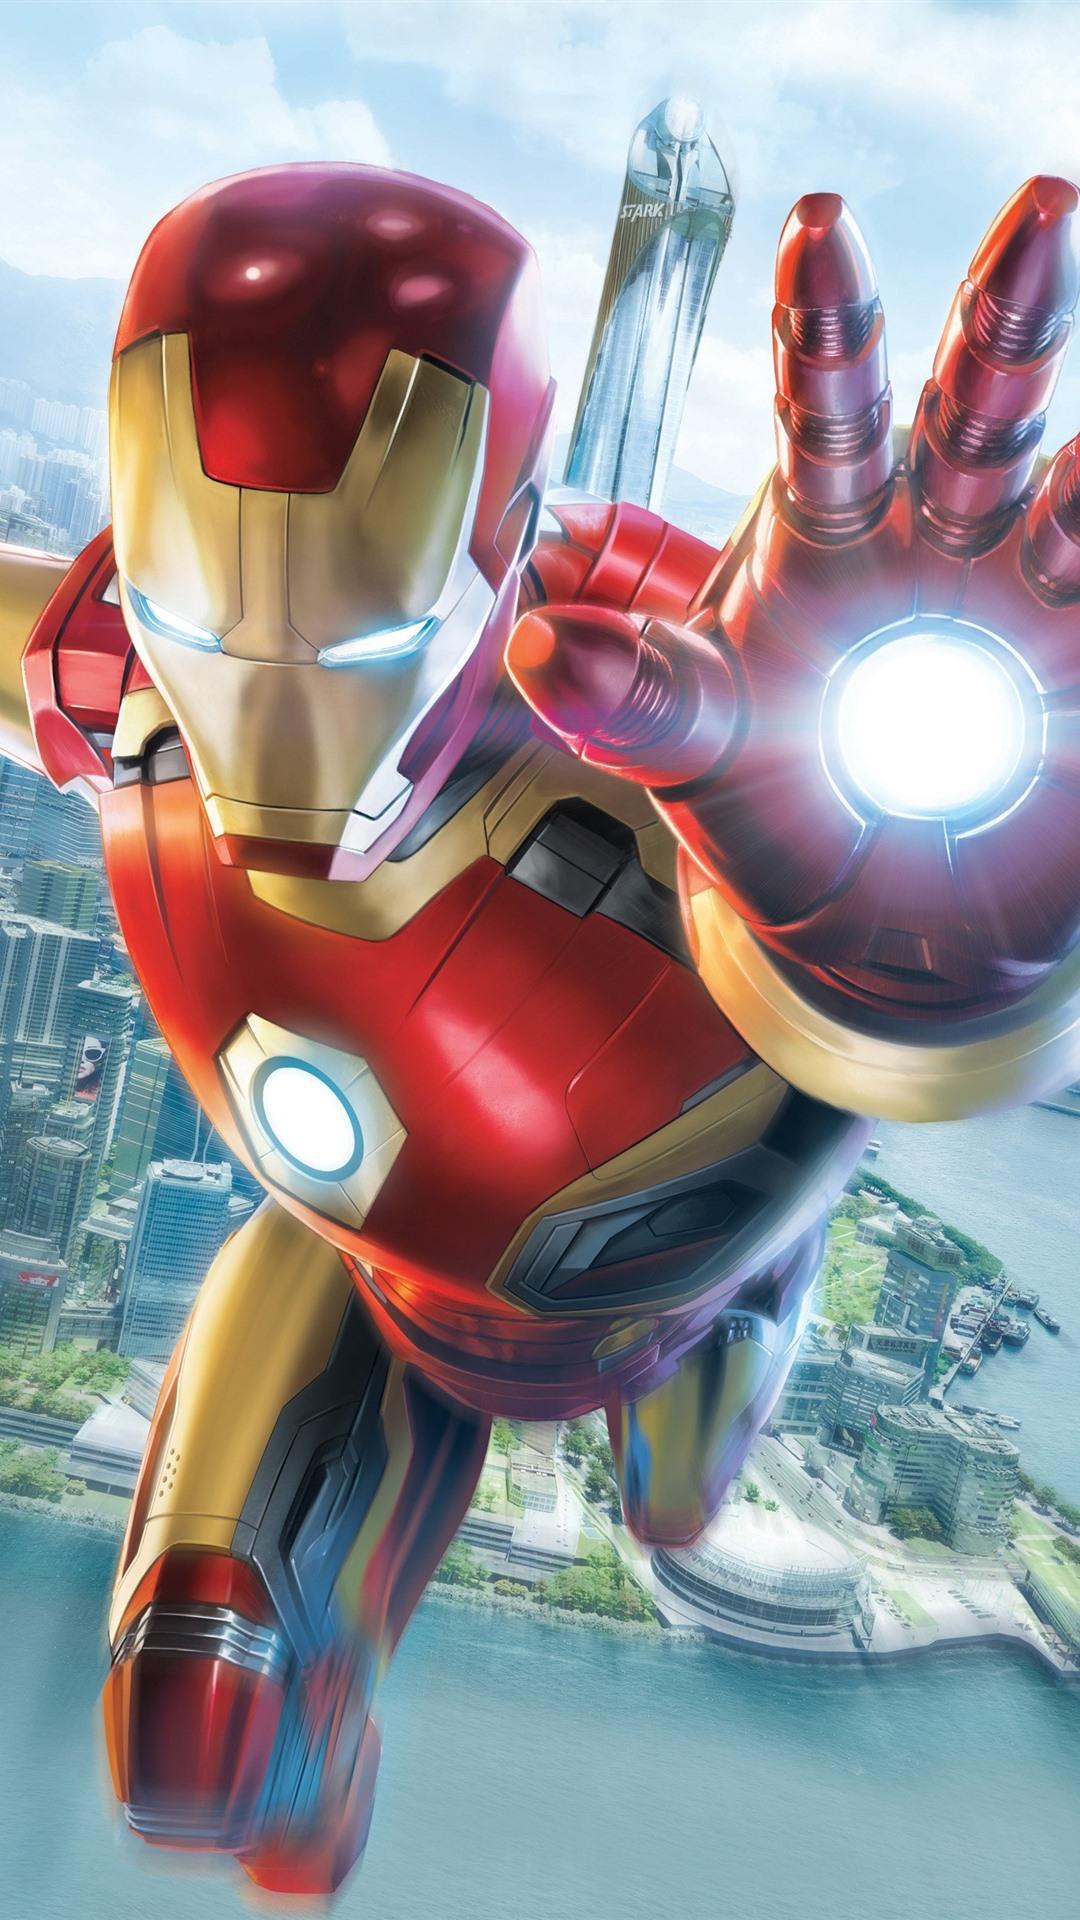 Iron Man, Flight, Hand, City, Sky 1080x1920 IPhone 8 7 6 6S Plus Wallpaper, Background, Picture, Image